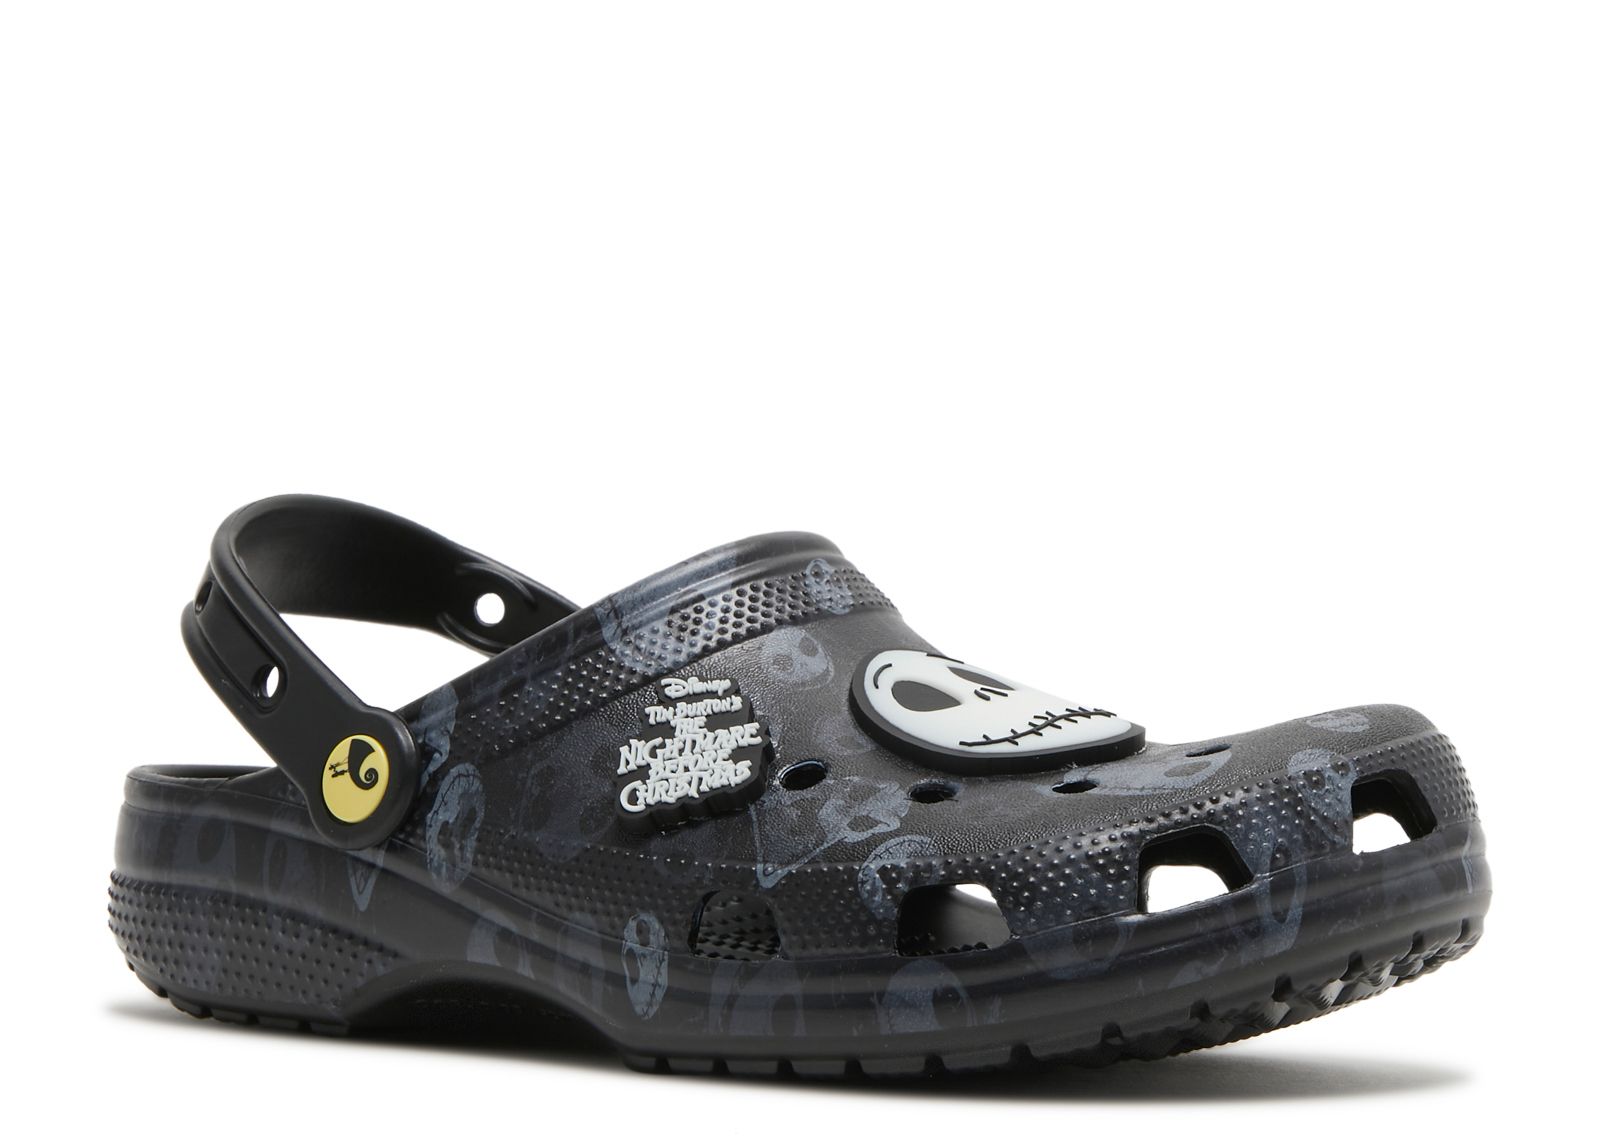 Halloween The Nightmare Before Christmascrocs Comfortable Clogs Crocband  Shoes For Men Women –